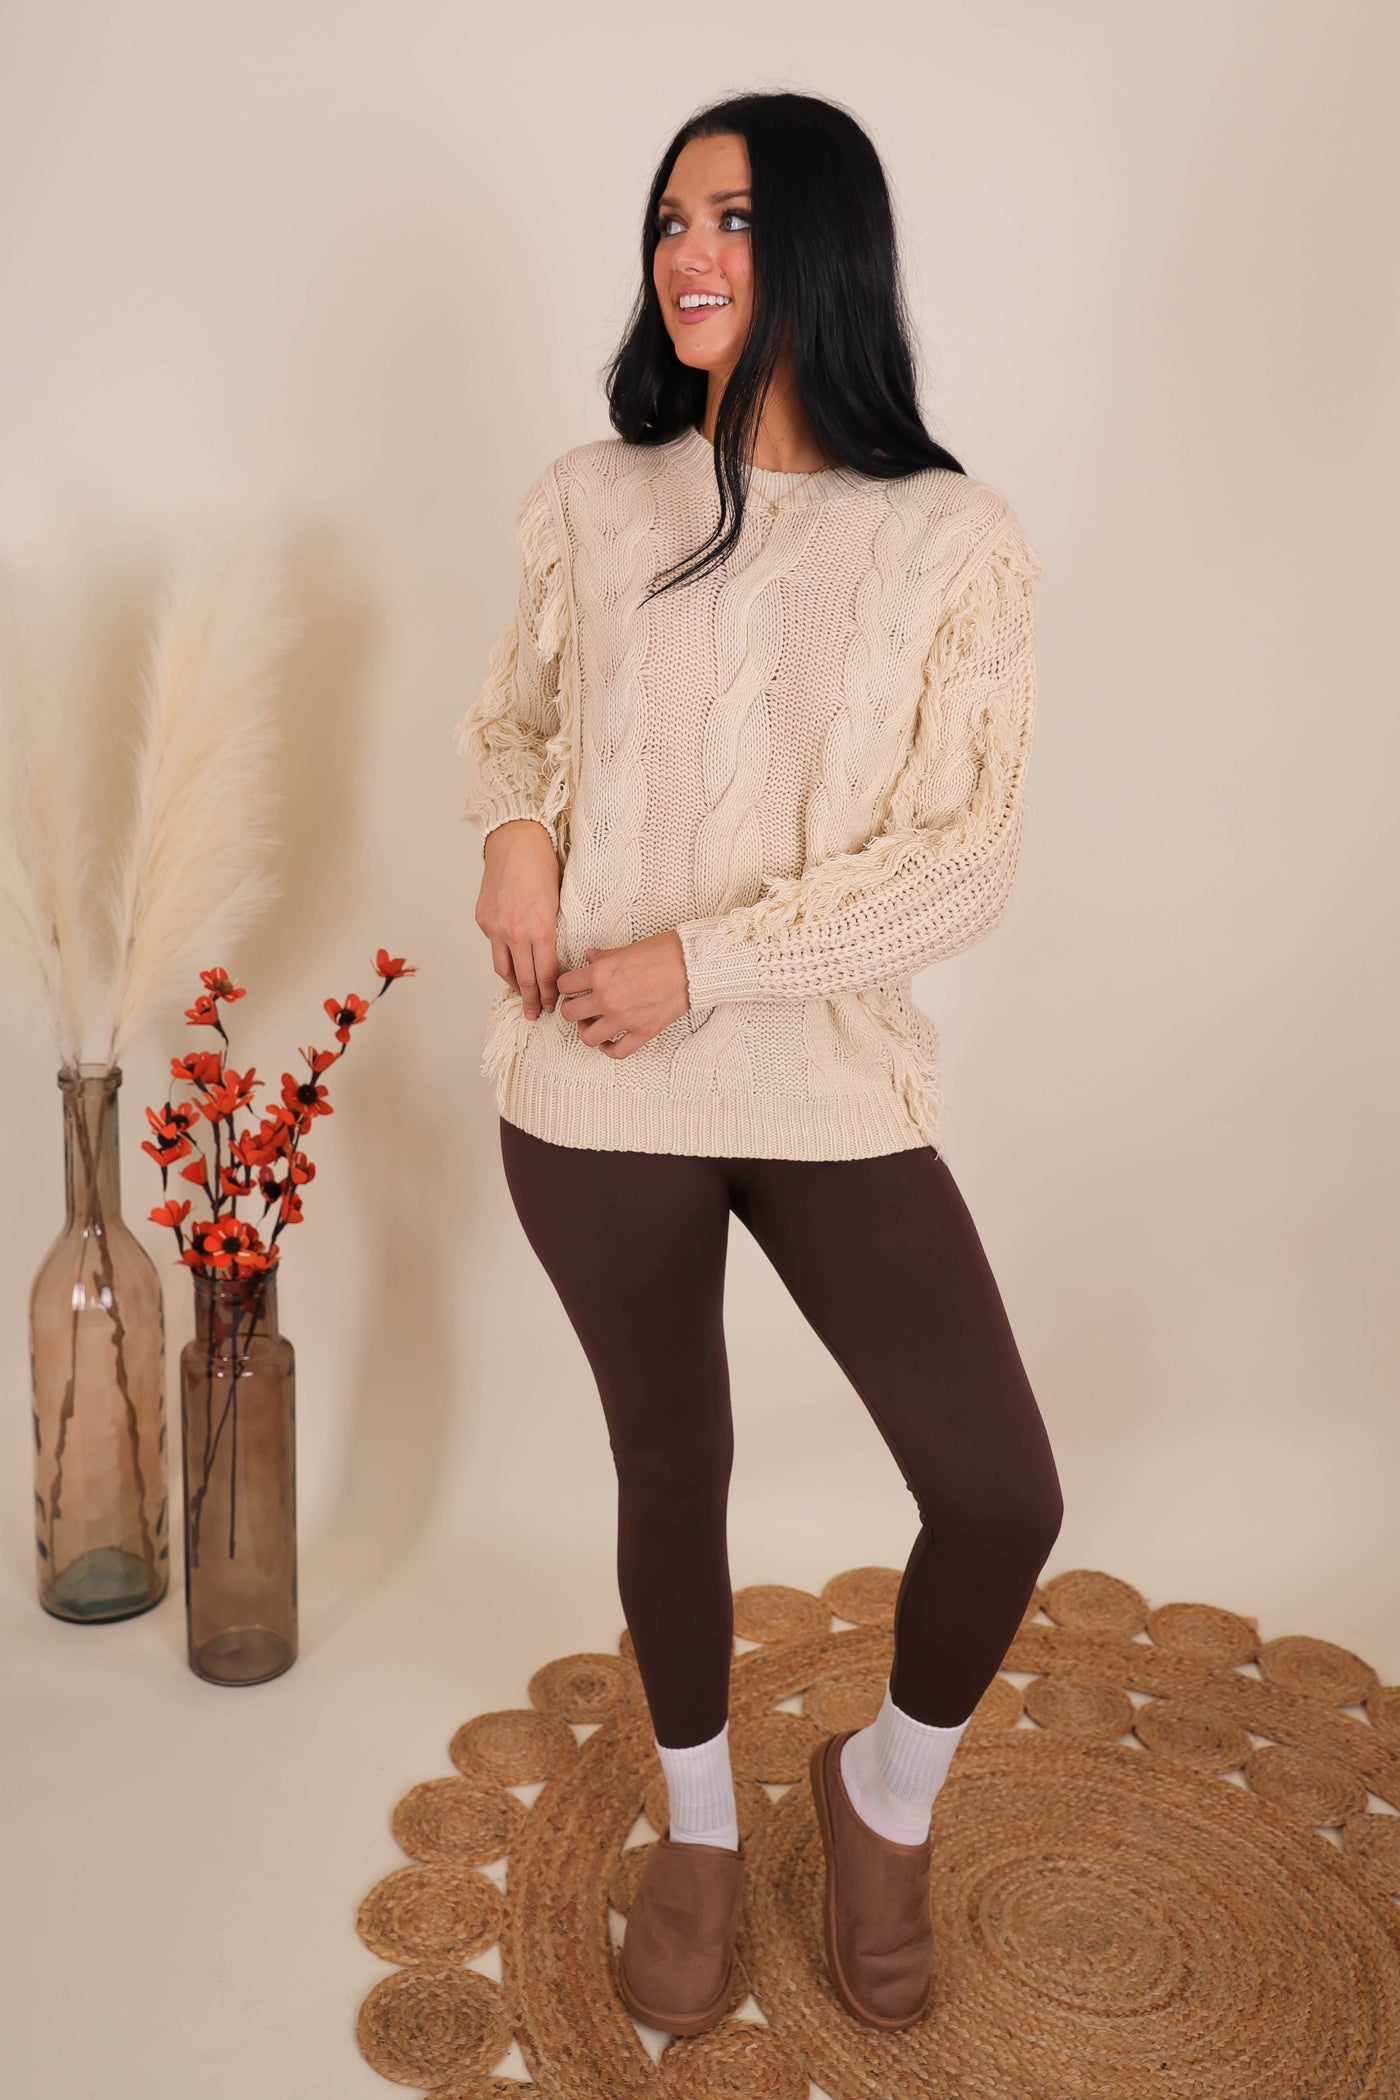 Women's Cable Knit Sweater with Fringe- Light Weight Fringe Sweater- And The Why Sweater